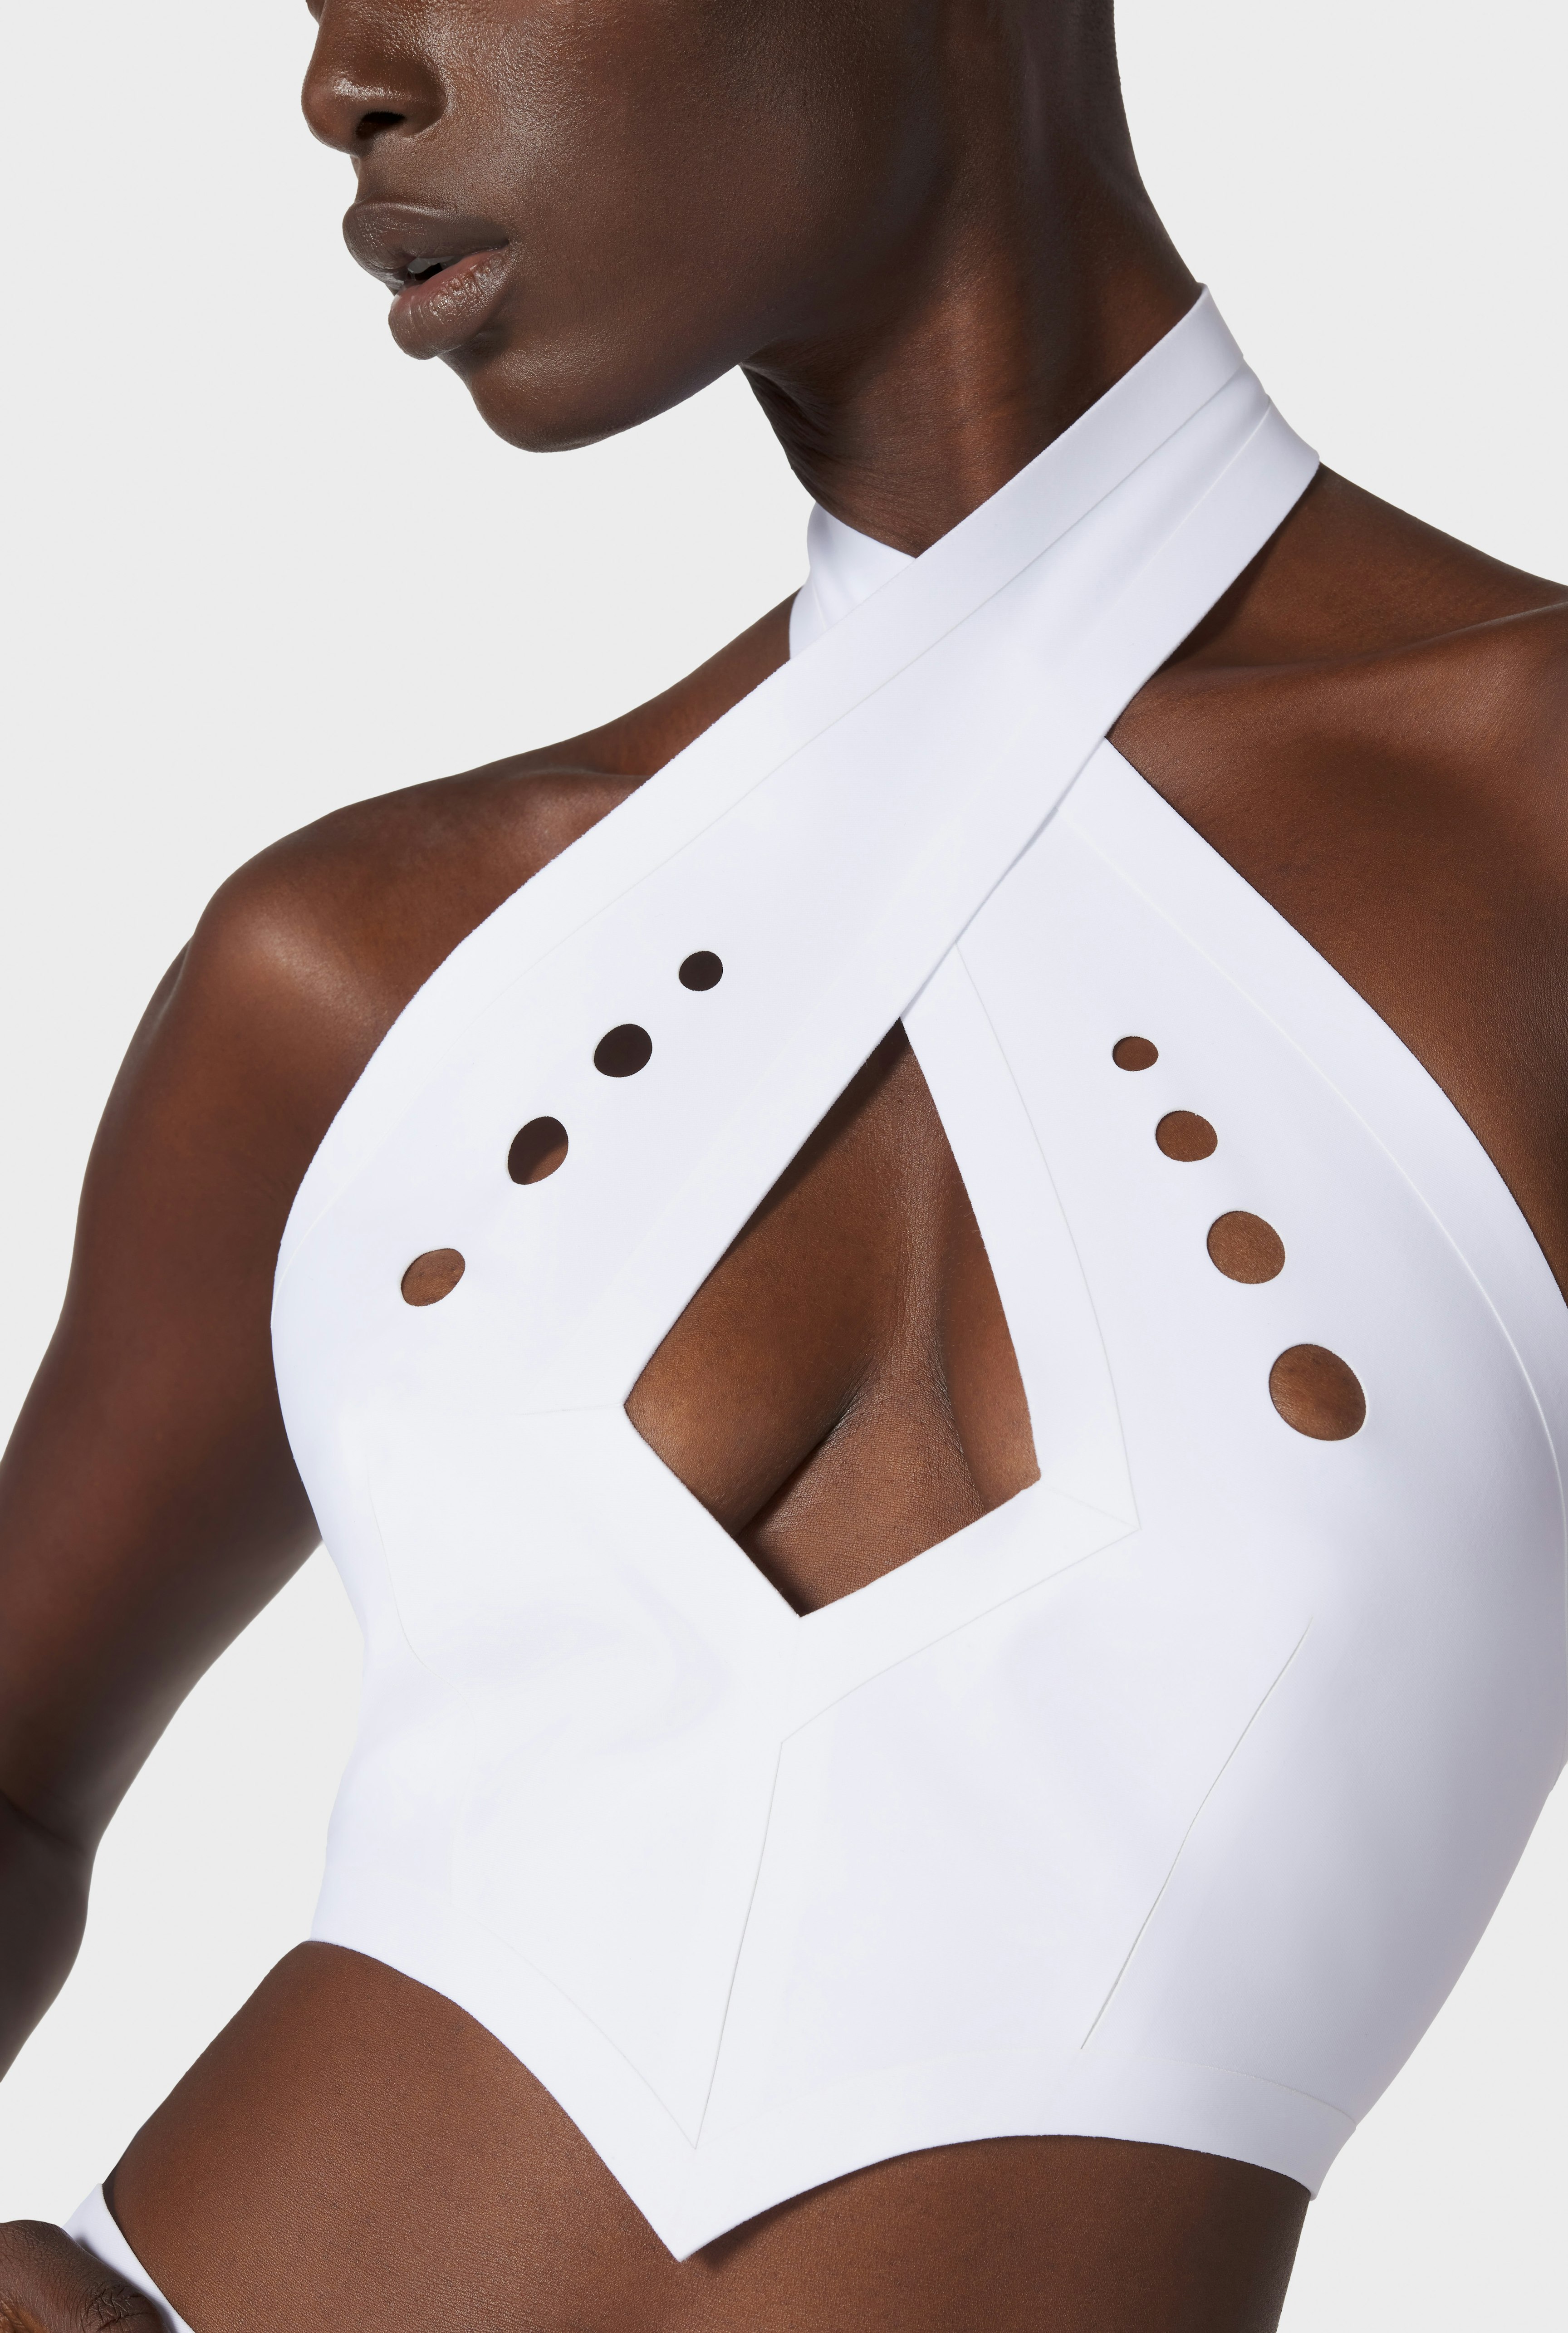 The White Perforated Crop Top hover